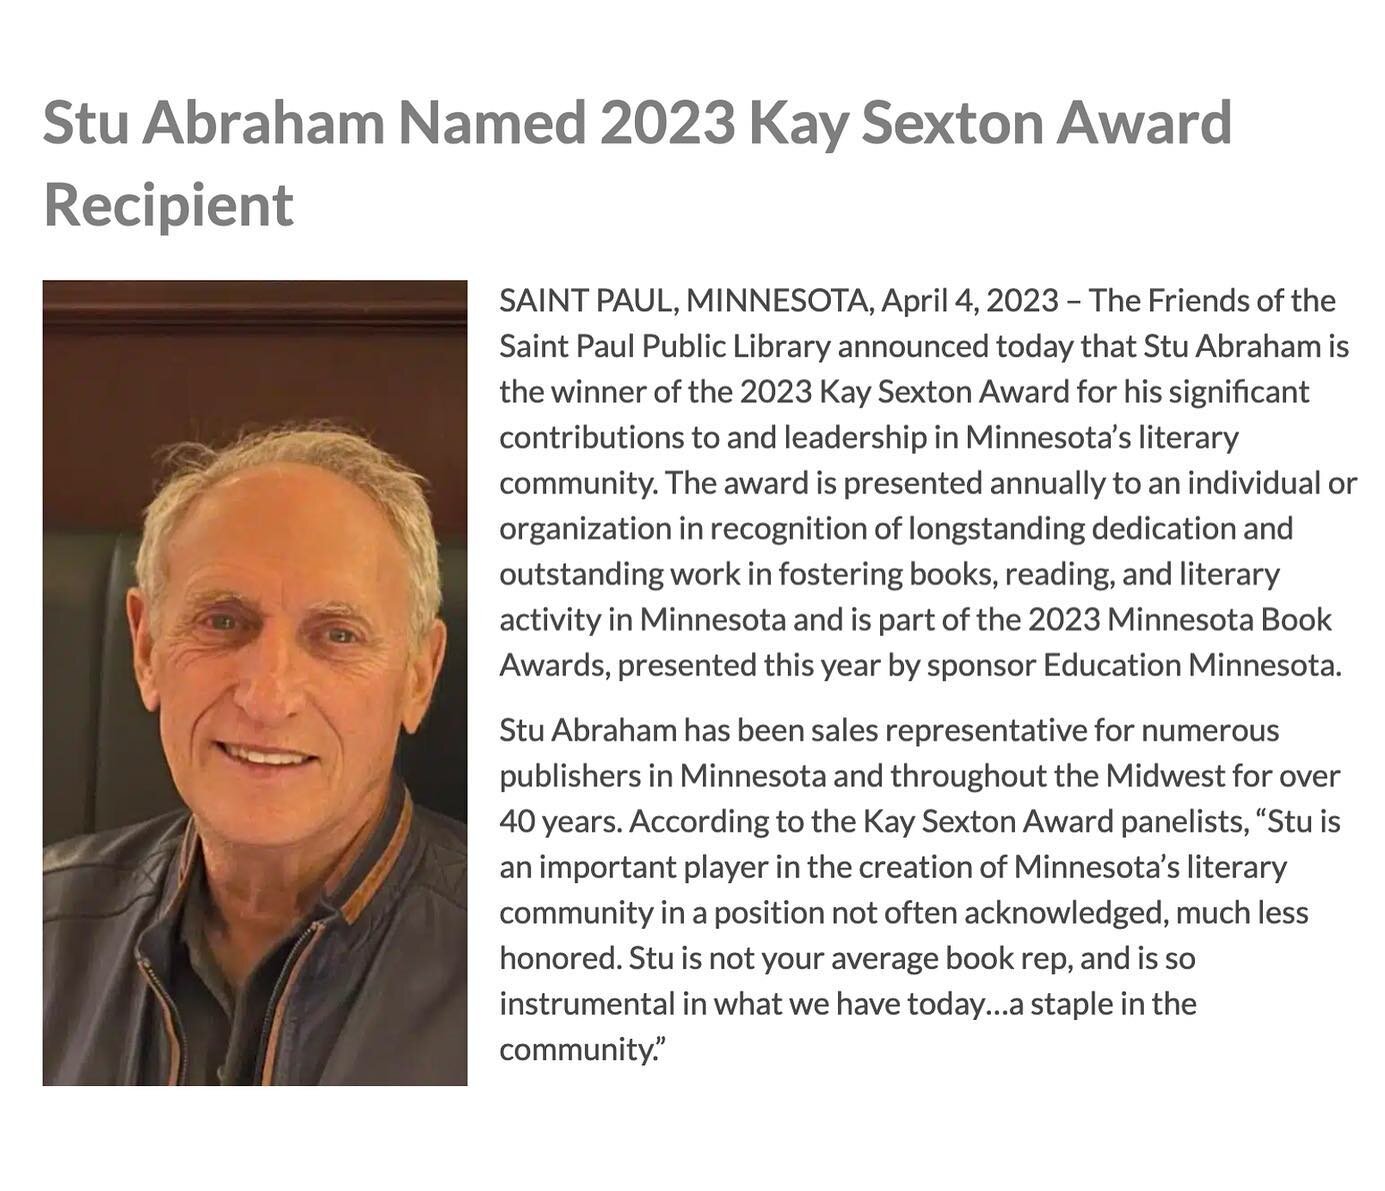 We are beyond thrilled to share that our very own Stu Abraham has been named the 2023 Kay Sexton Award Recipient!!!

We could go on and on about how deserving he is of this honor, but for now we&rsquo;ll just say that we&rsquo;re so grateful for ever